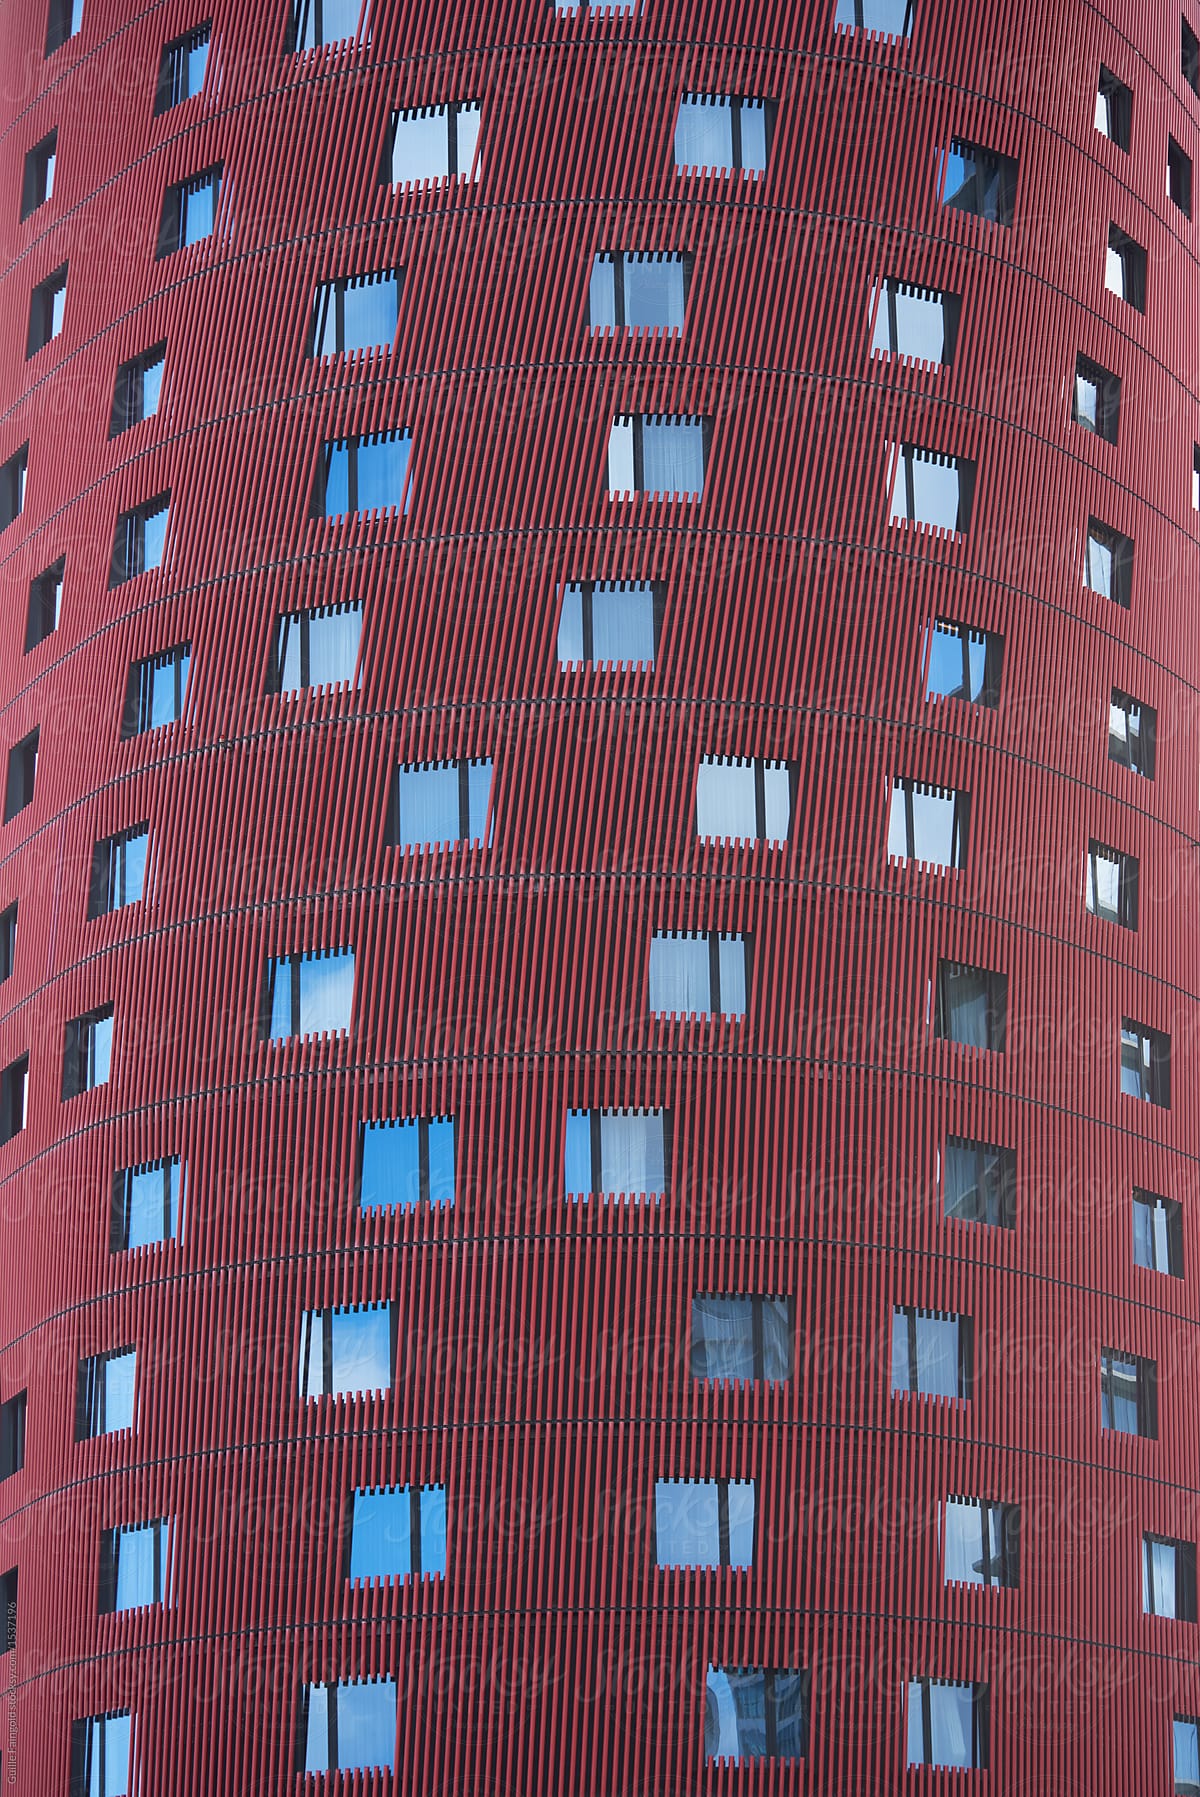 Circular building with red walls